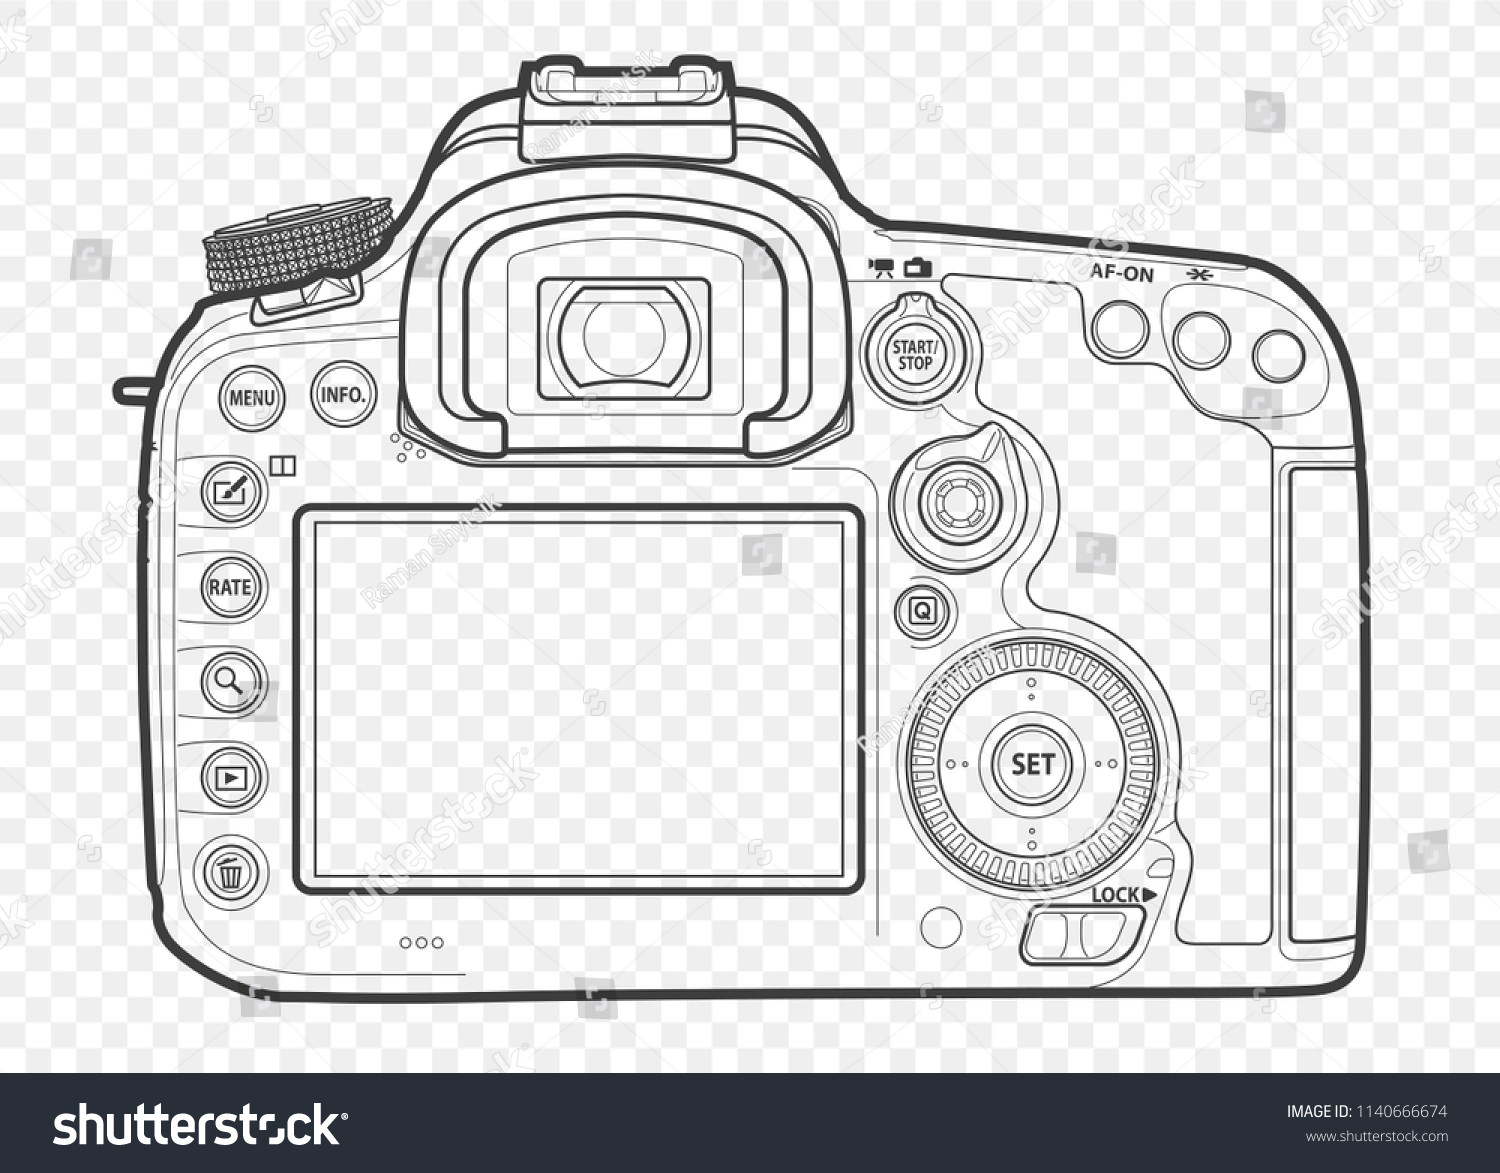 SVG of Outline vector illustration of reflex slr camera with lens in front, drawn with lines. svg